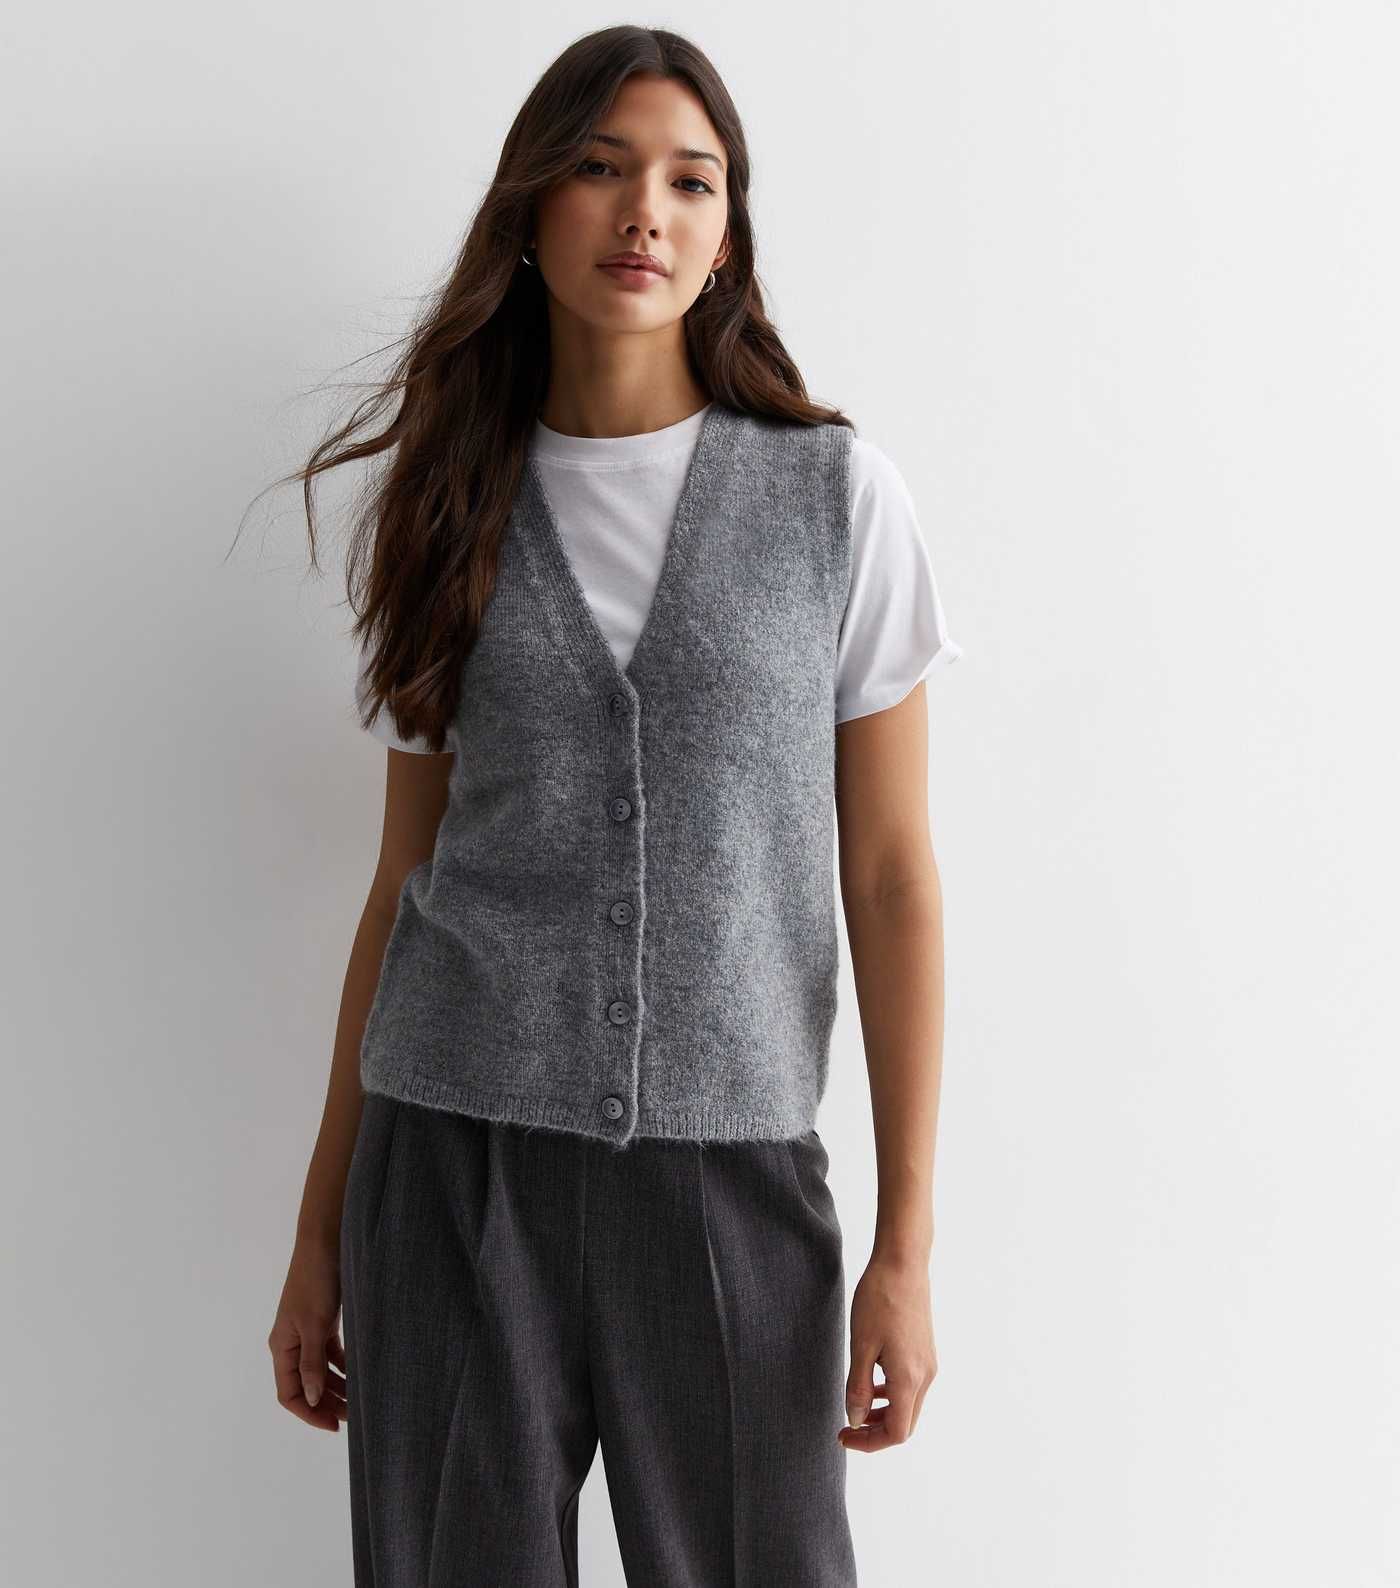 Grey Knit Button Front Vest
						
						Add to Saved Items
						Remove from Saved Items | New Look (UK)